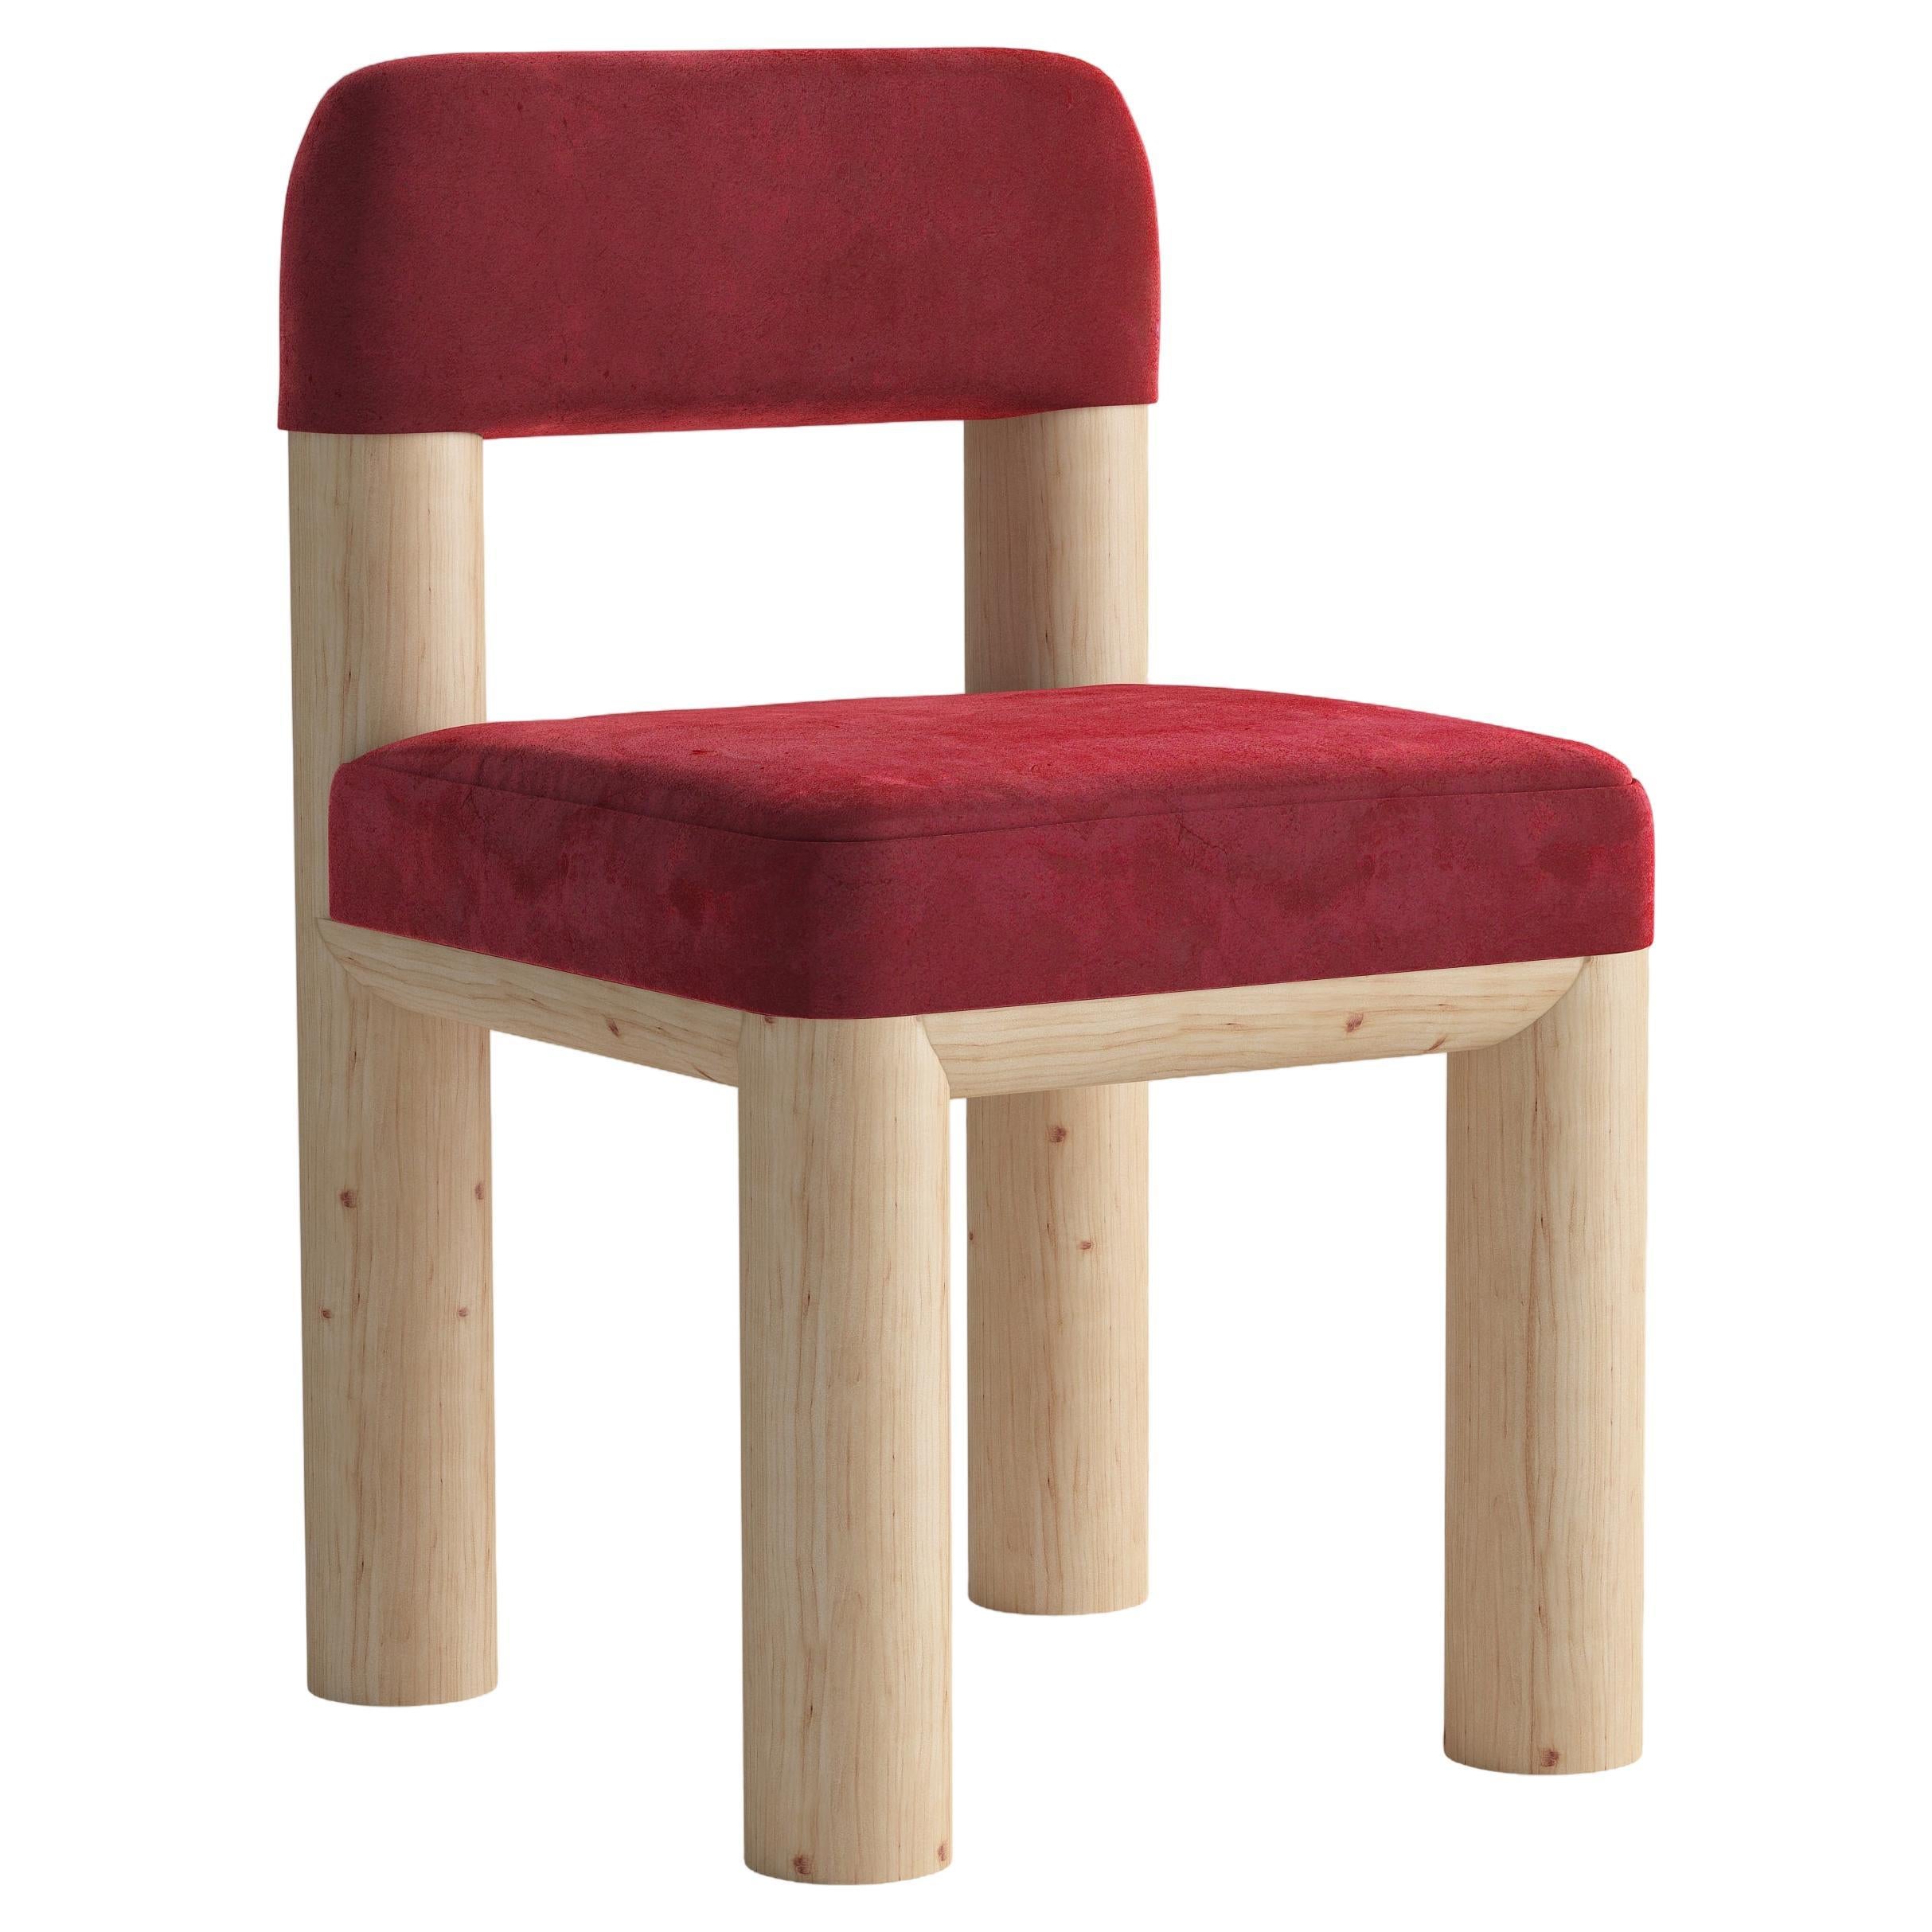 Upholstered Dining Chair with Solid Wood Legs - Lollipop Chair by Kunaal Kyhaan